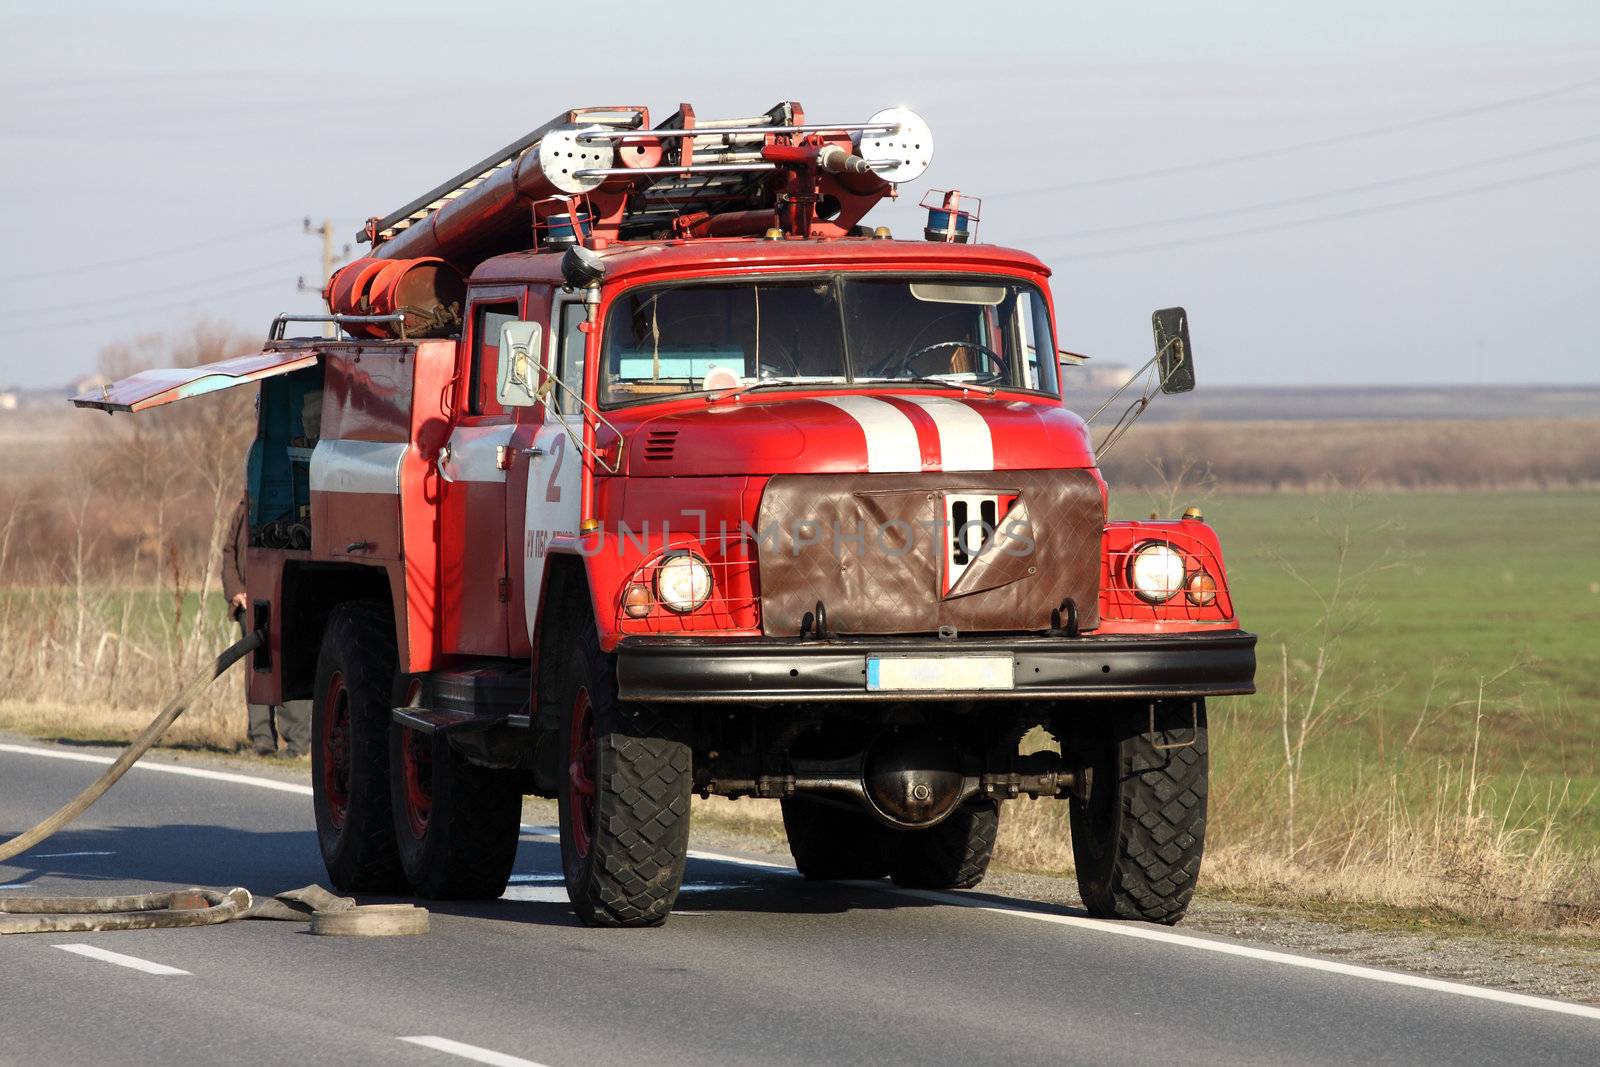 Red Fire Truck in action on the road